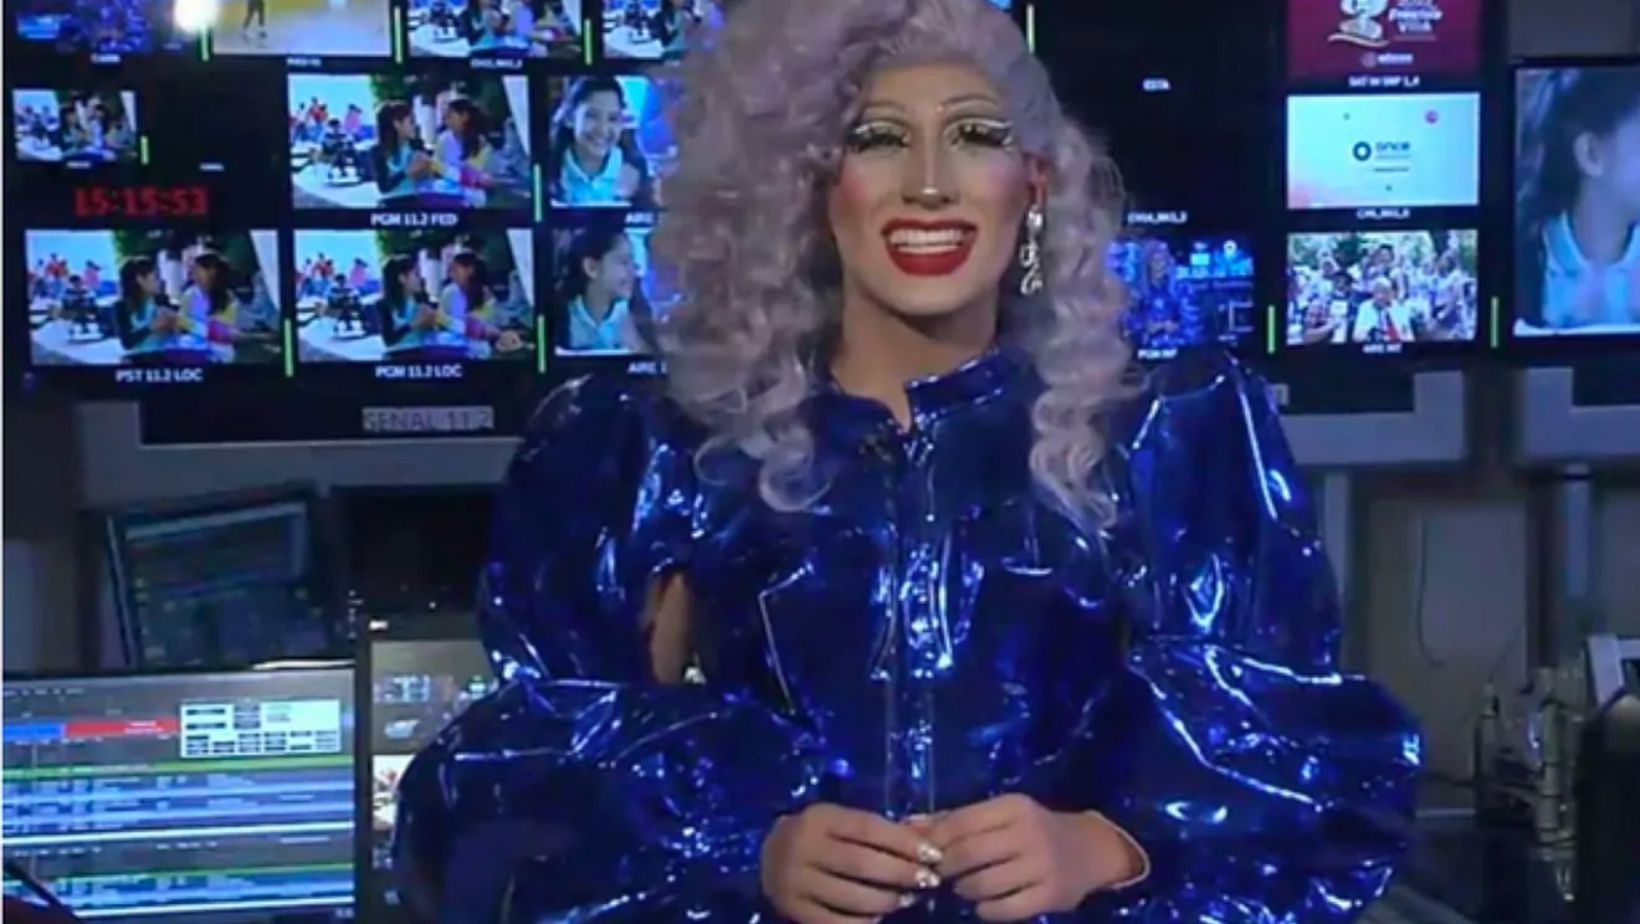 Mexico Made History By Having a Drag Queen Report the News on National TV For the First Time Ever